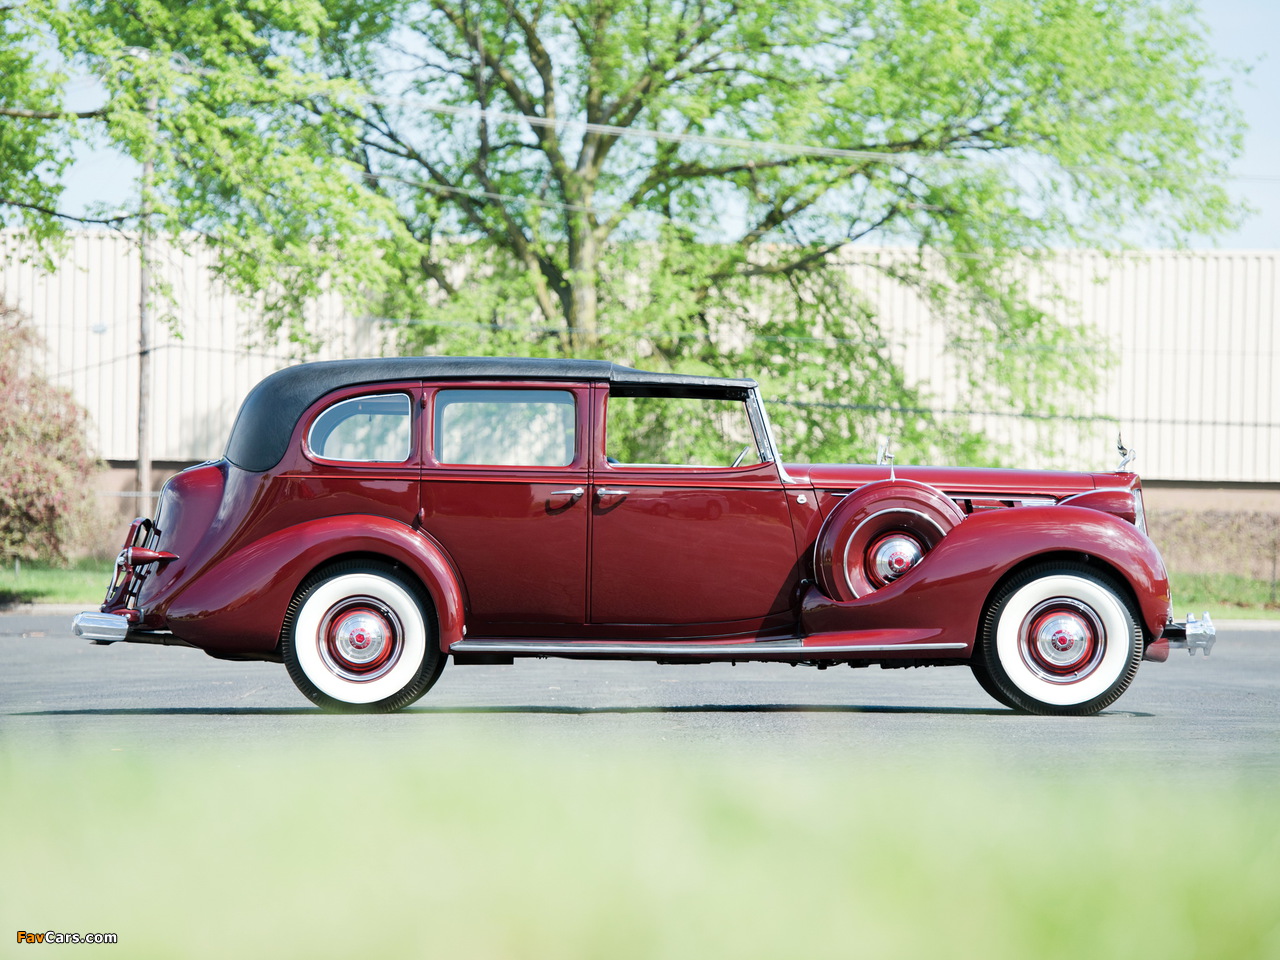 Images of 1938 Packard Twelve All-Weather Town Car by Rollston (1608-495) (1280 x 960)